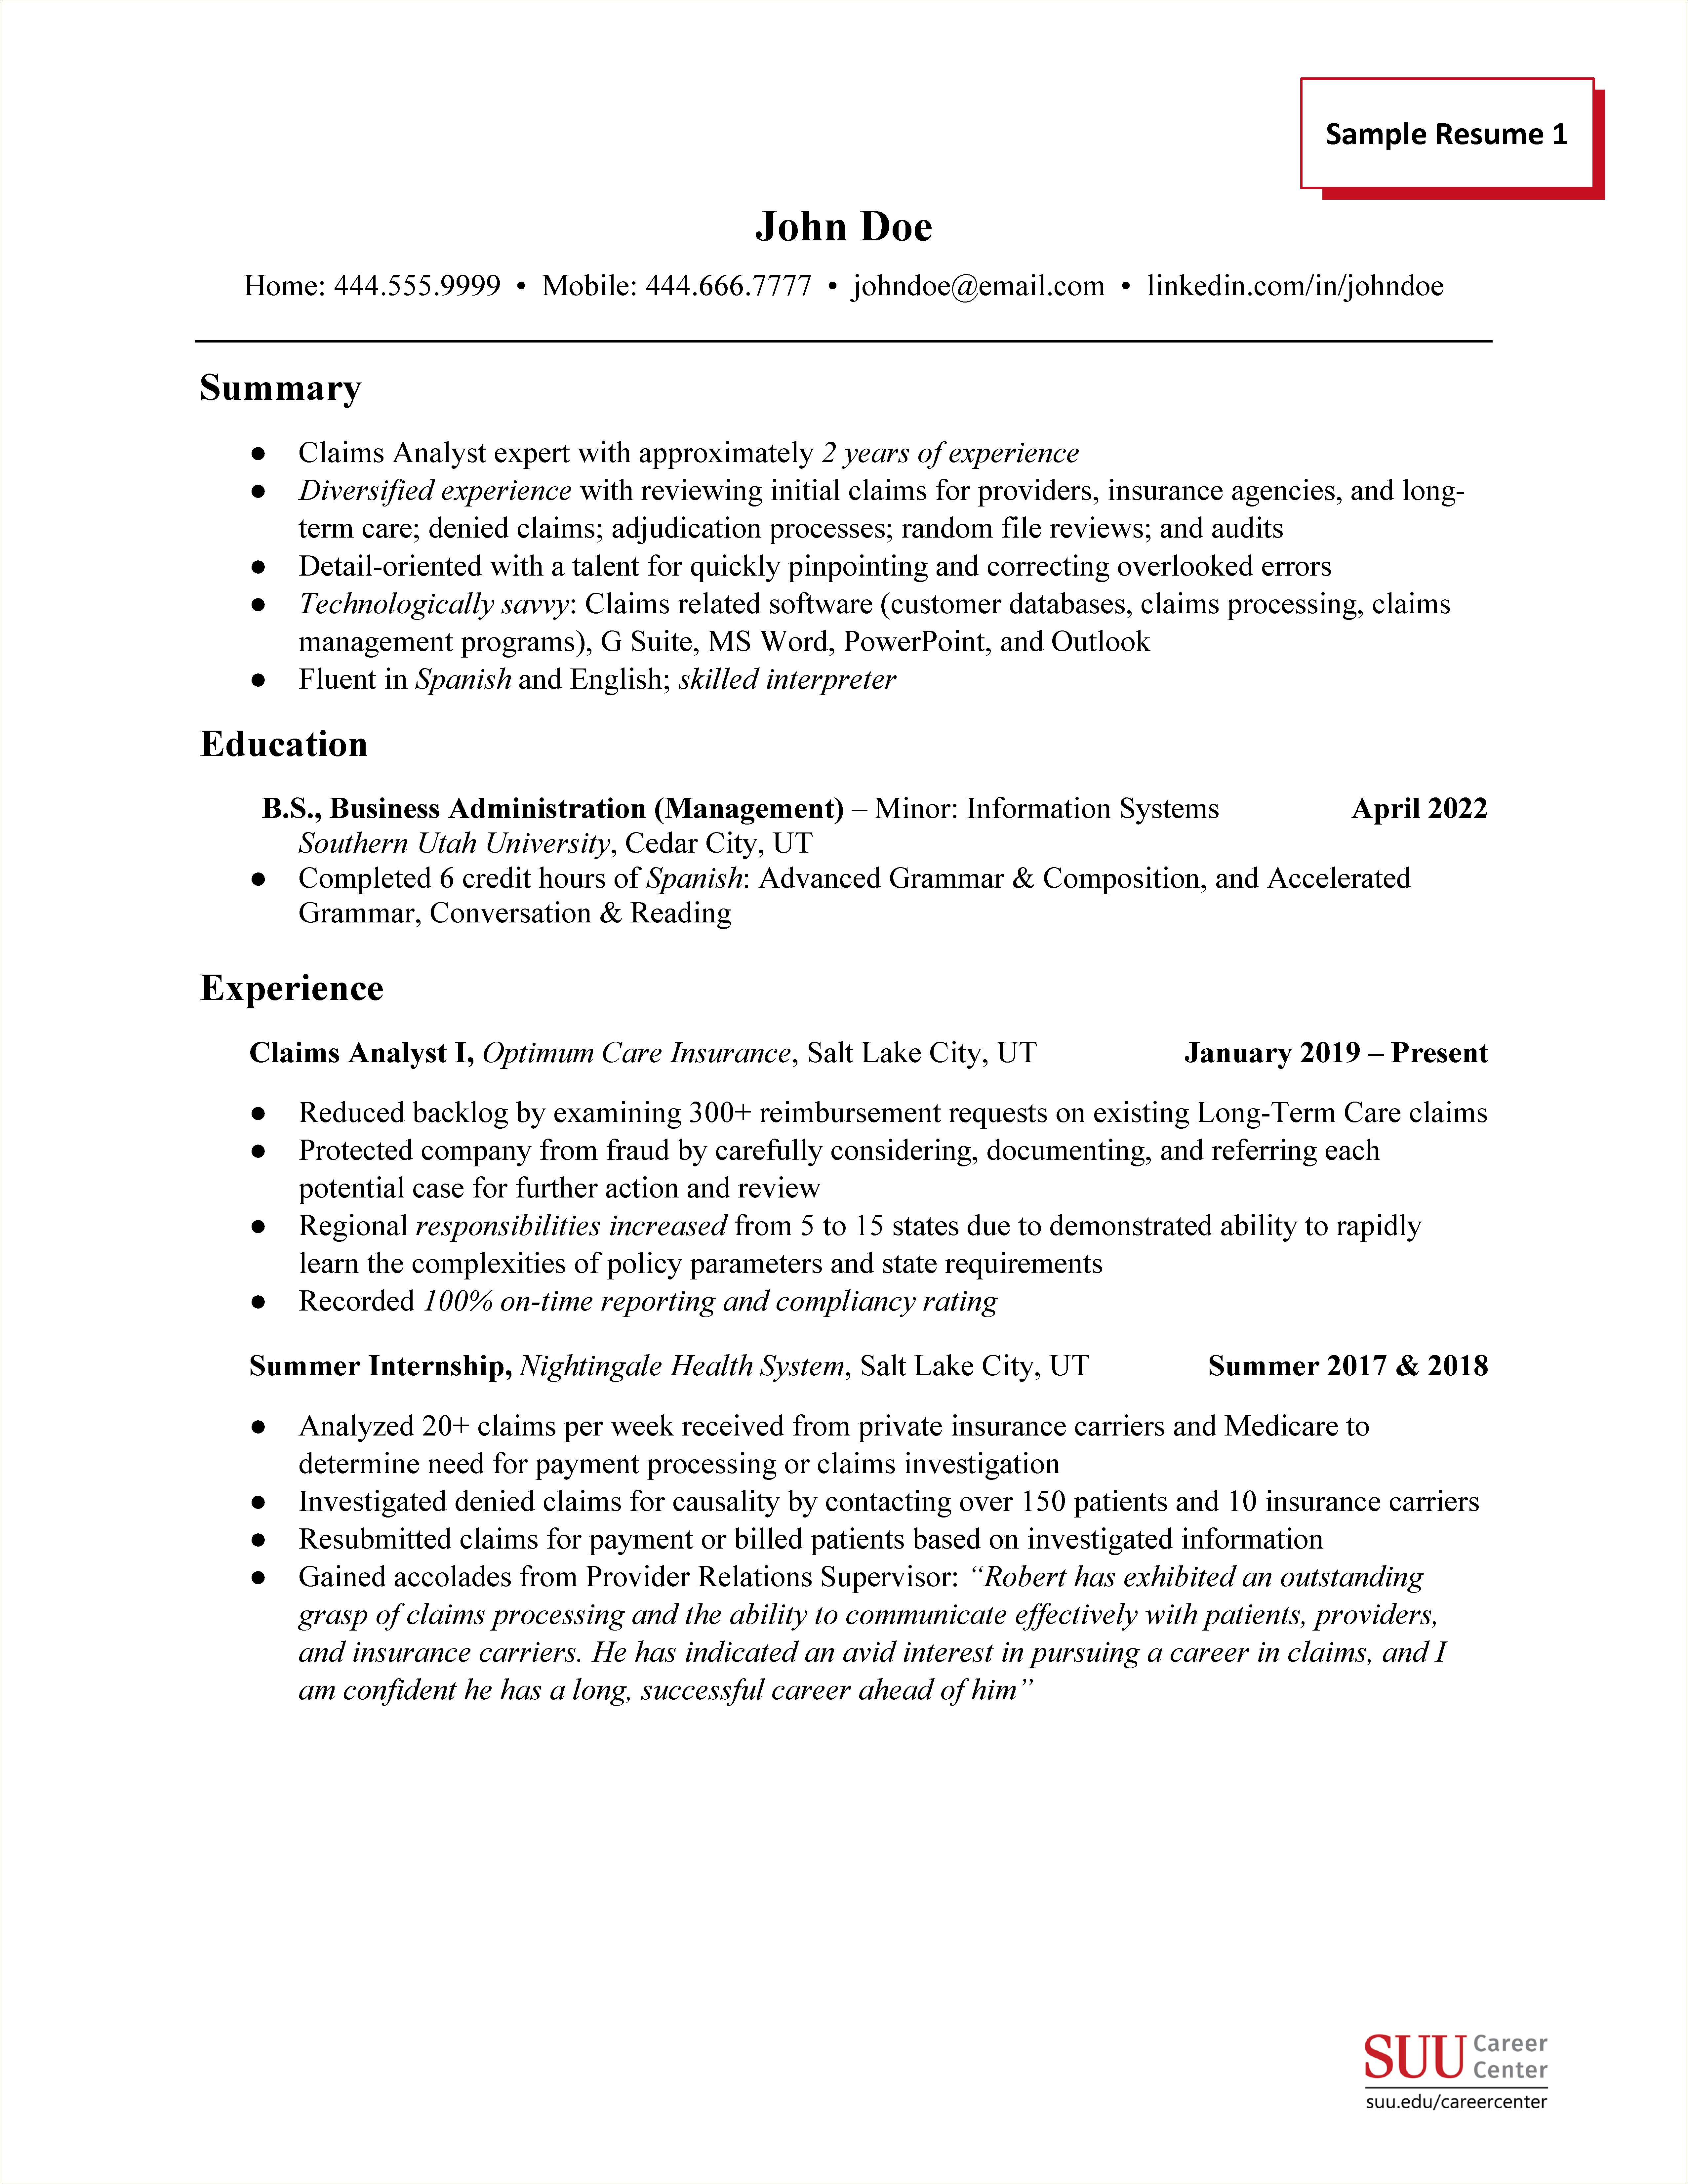 Email Should I Combine Cover Letter And Resume